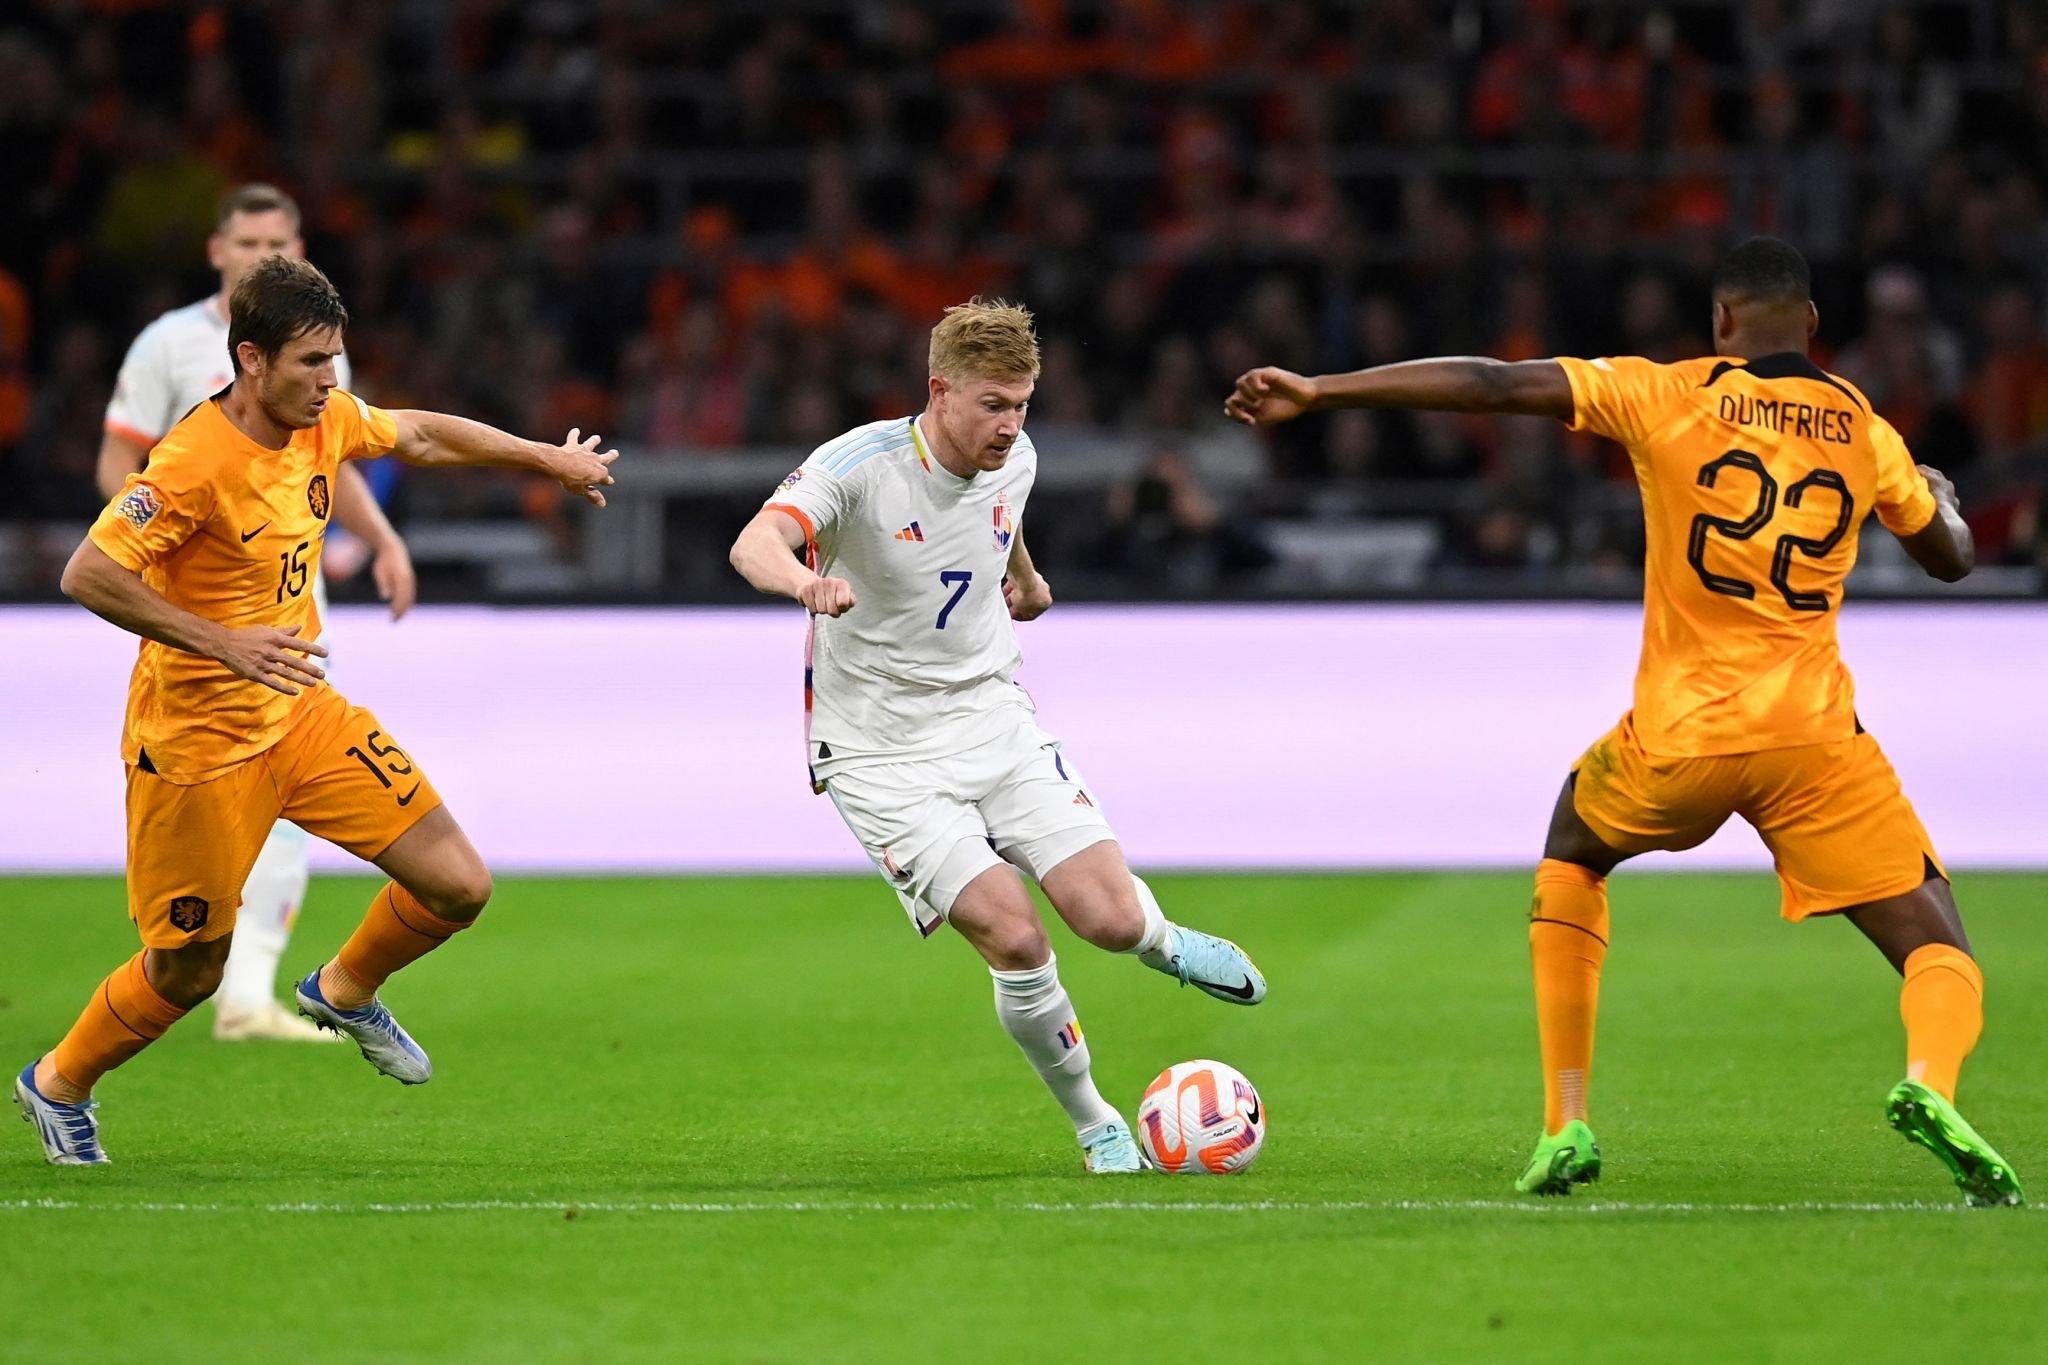 Kevin de Bruyne featured for Belgium in their 1-0 loss to Netherlands